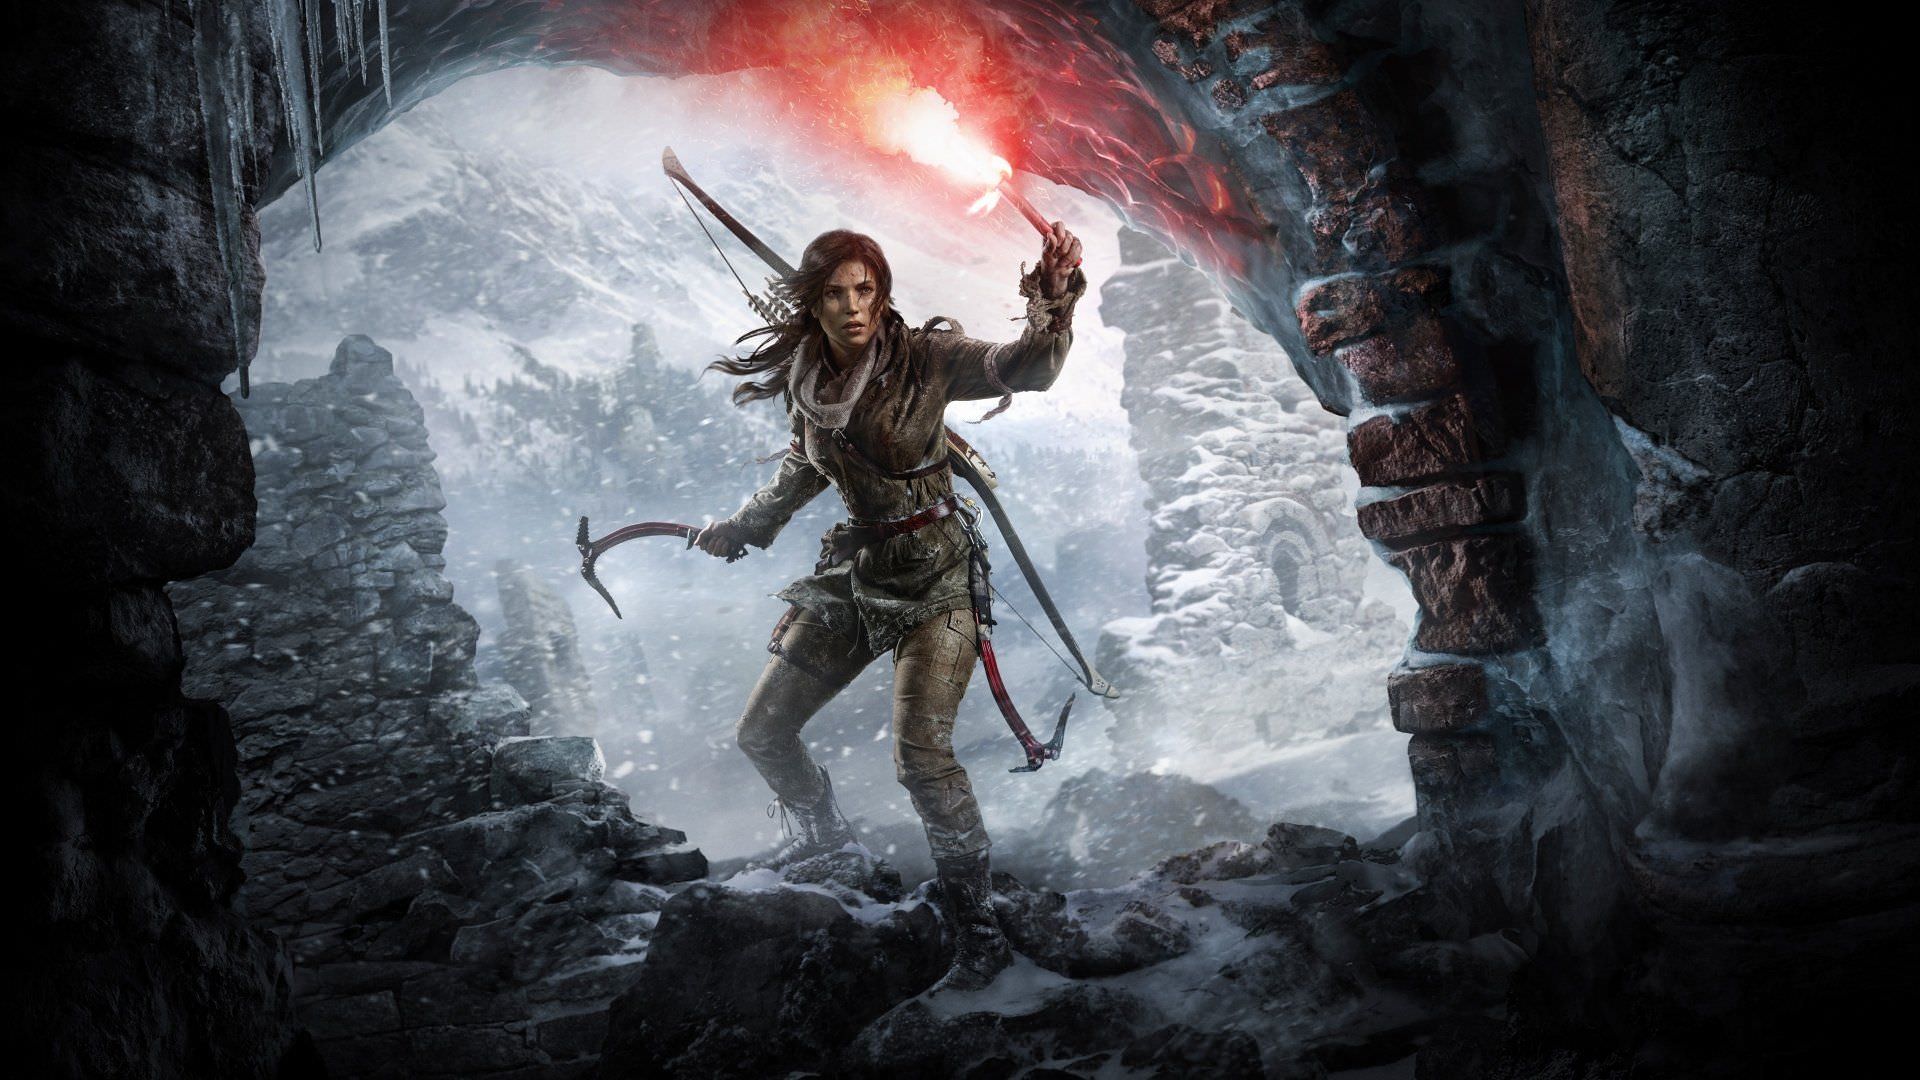 Rise of the Tomb Raider game and Lara Croft keeping the red light source at the tomb entrance